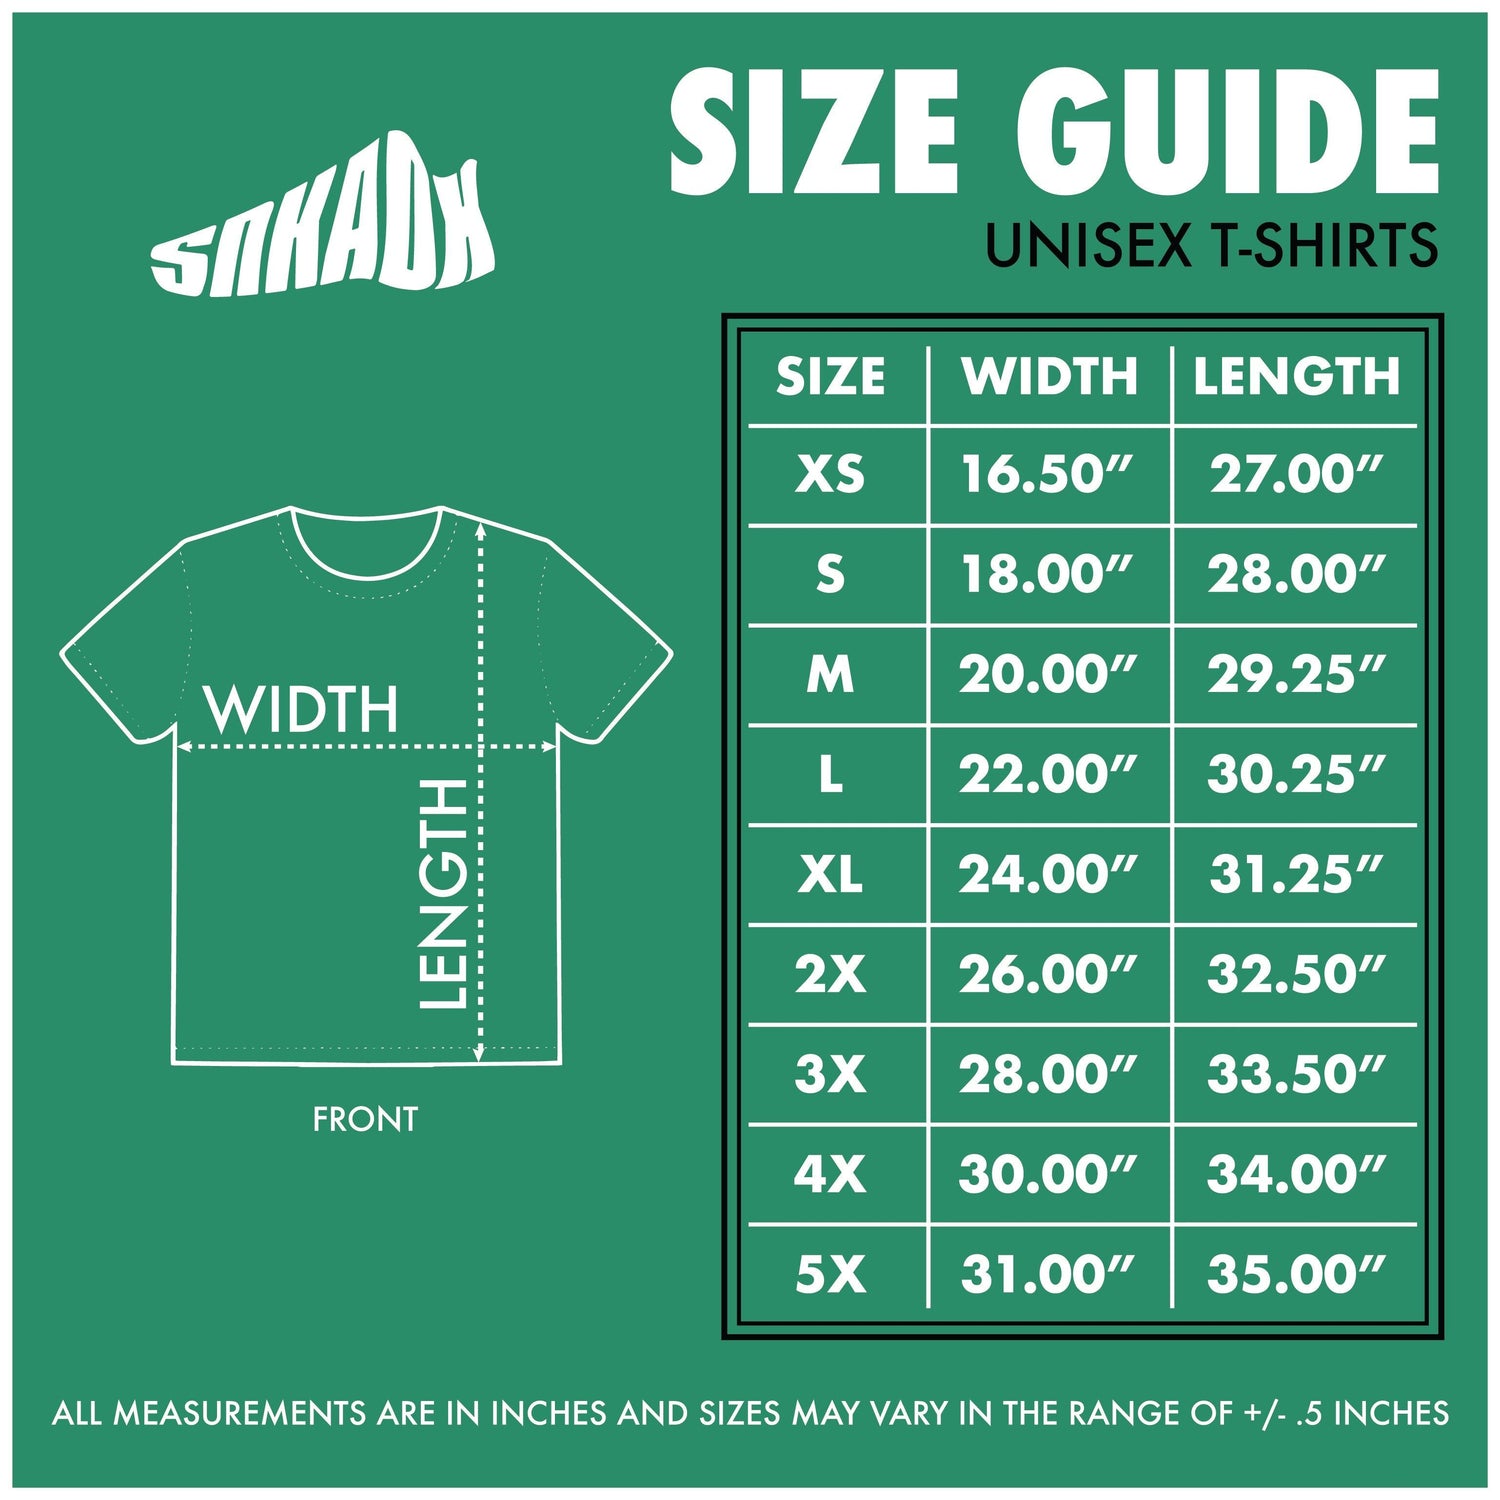 SNKADX T-Shirt Size Guide